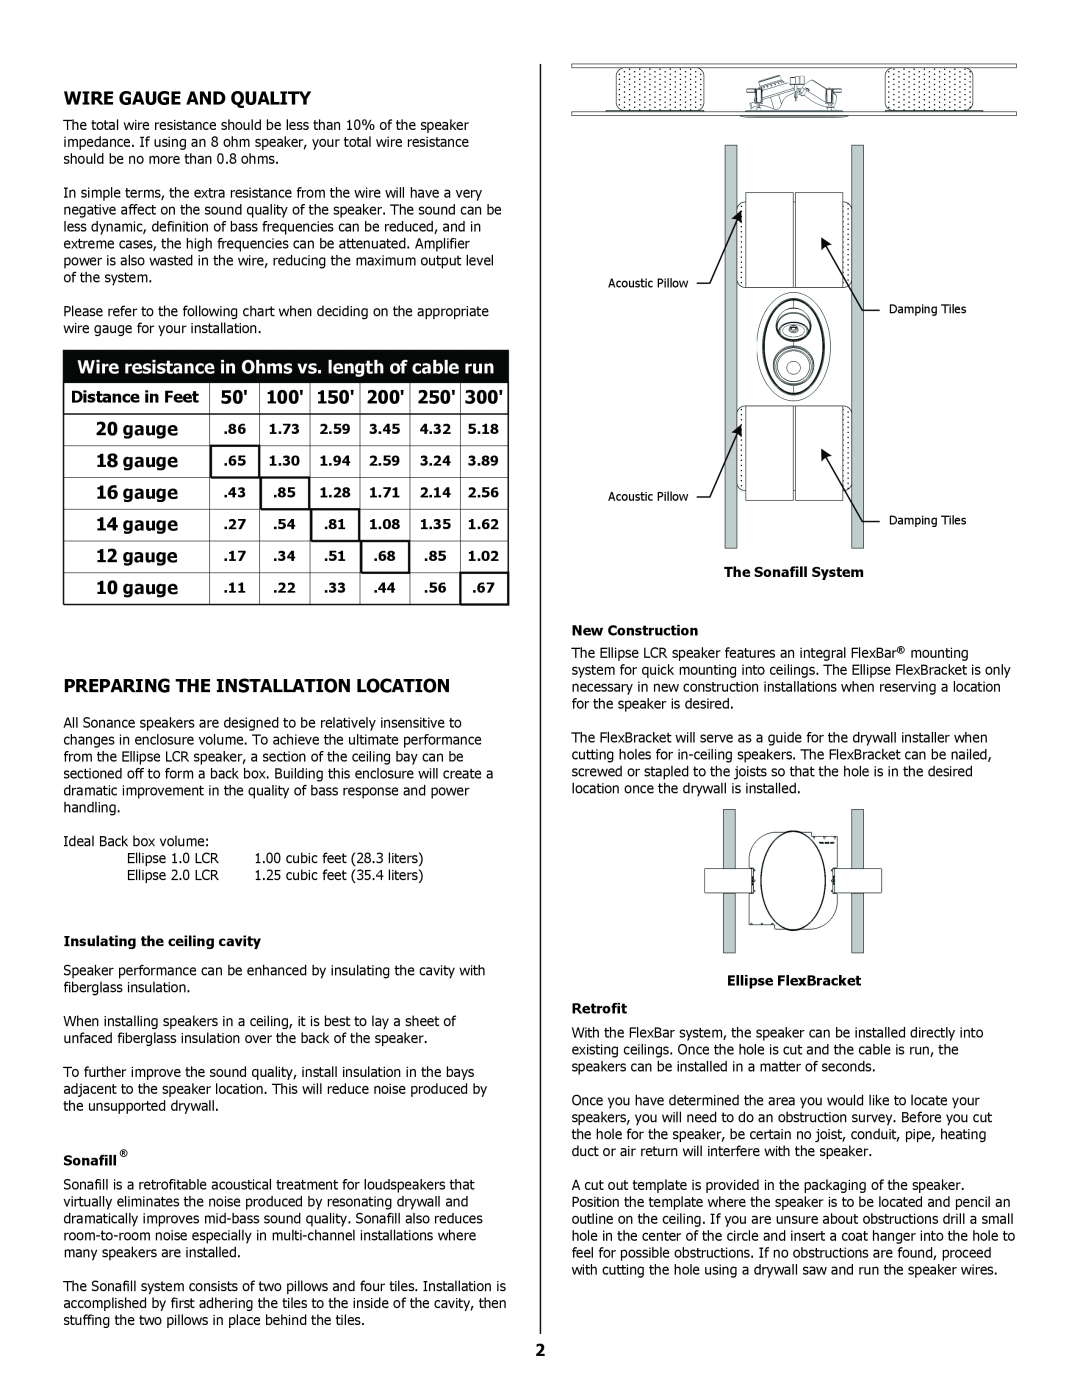 Sonance 91922 installation instructions Wire Gauge And Quality, Wire resistance in Ohms vs. length of cable run 